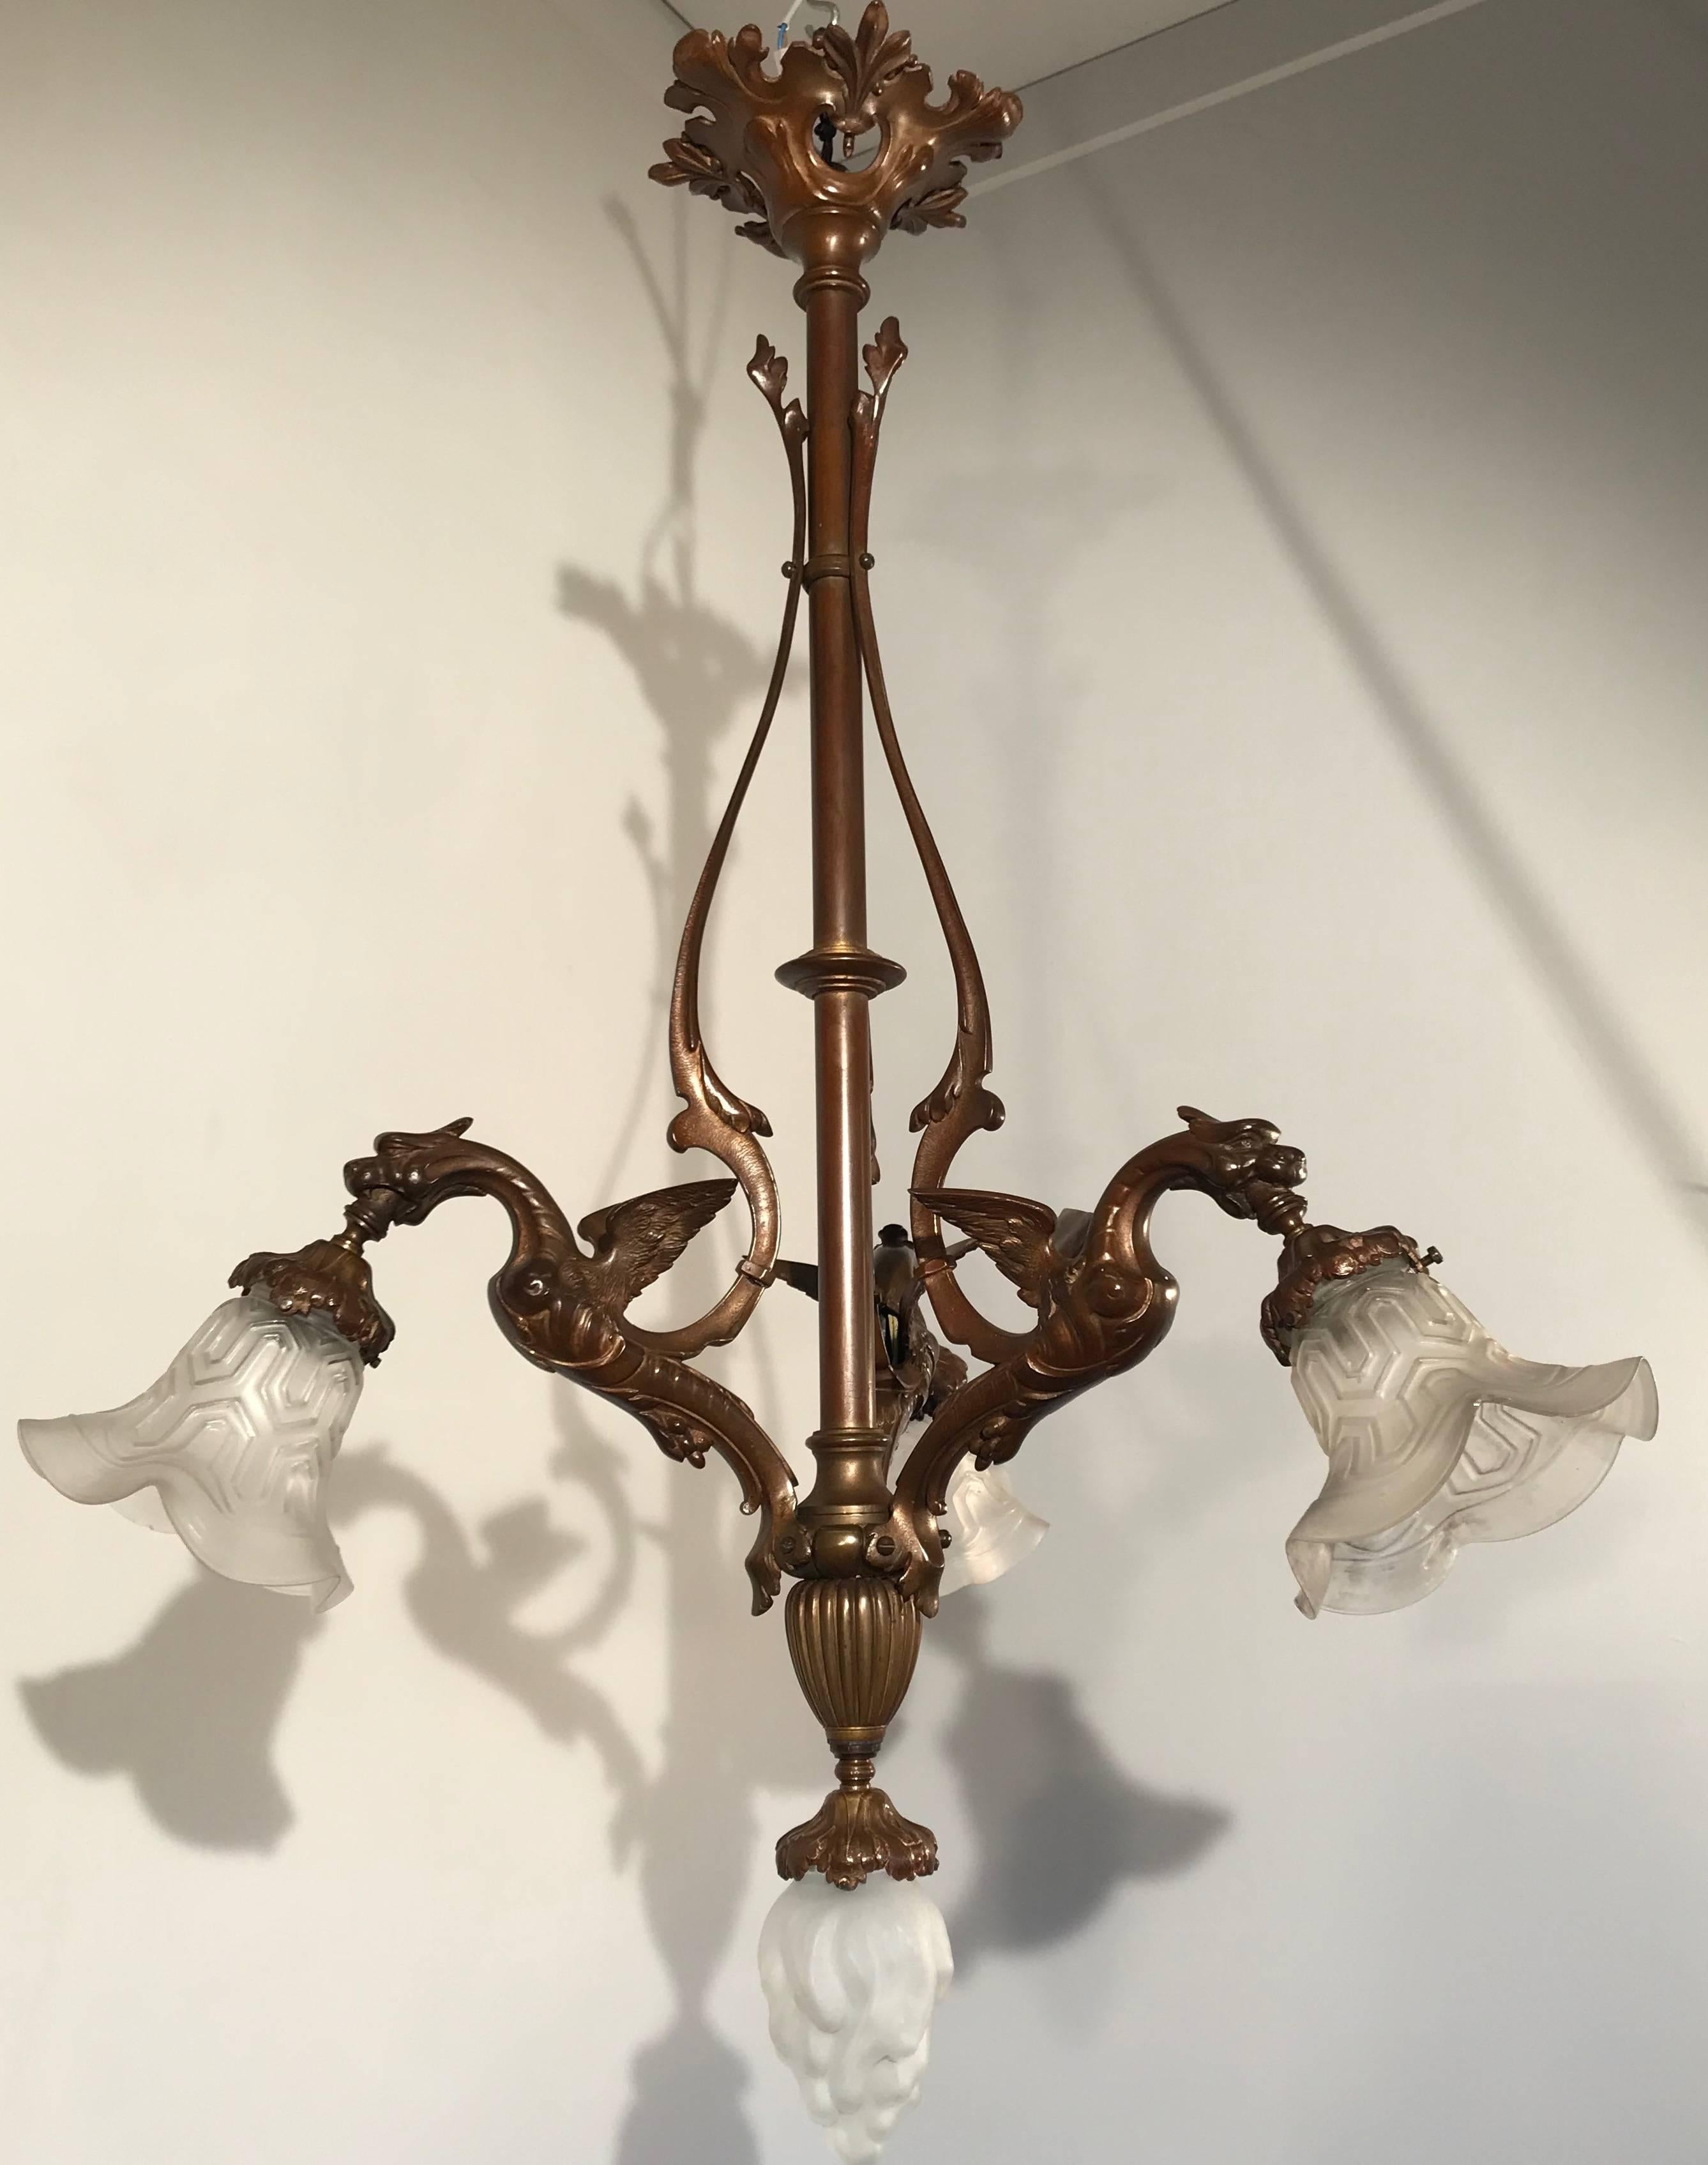 Striking early 1900s sculptural chandelier.

This antique and good quality chandelier comes with three beautifully crafted winged dragons. With the lamp shades in the position that they are, the light they radiate is like fire coming from the